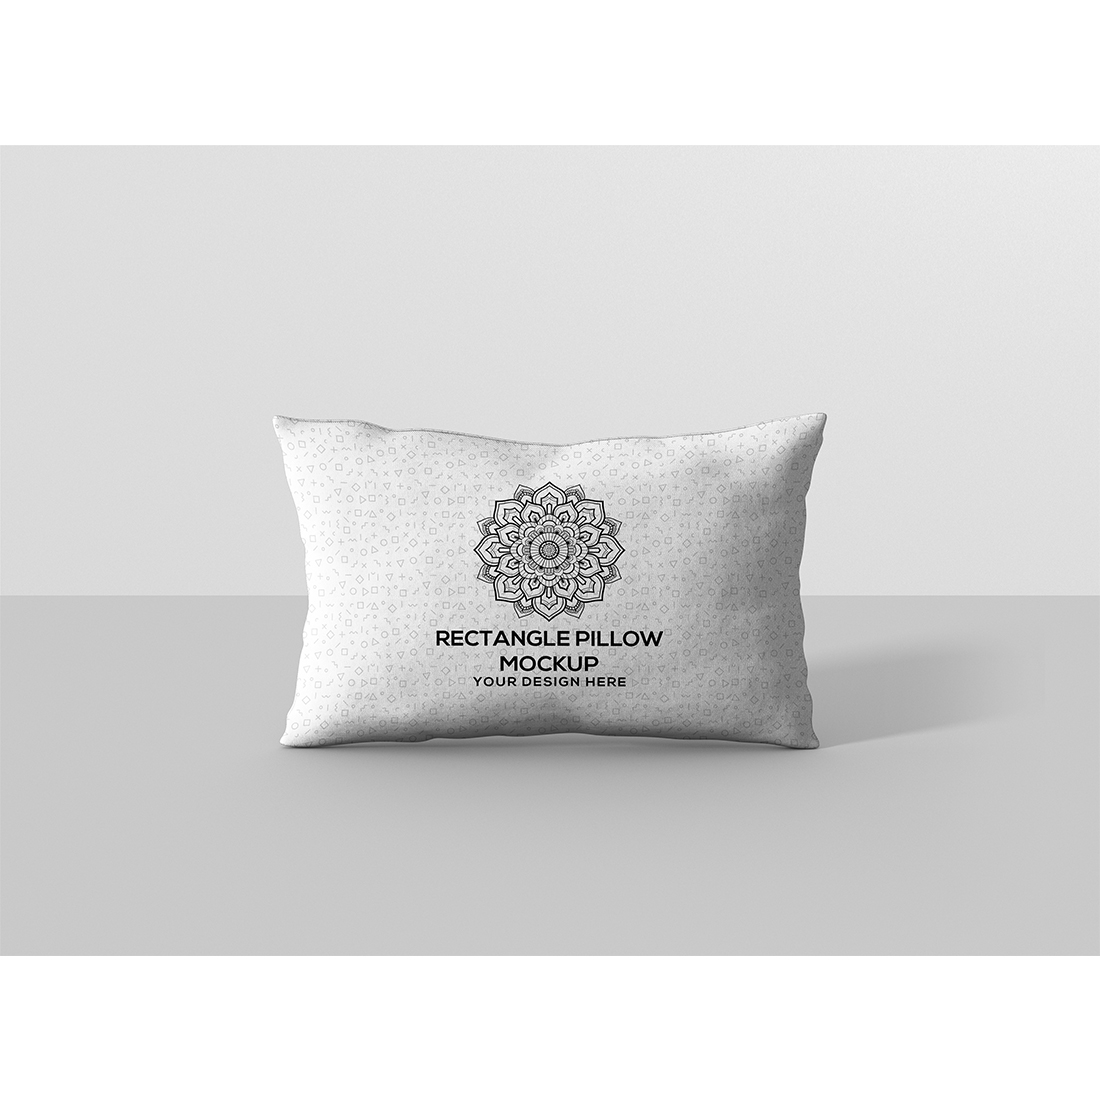 Rectangle Pillow Mockup cover image.